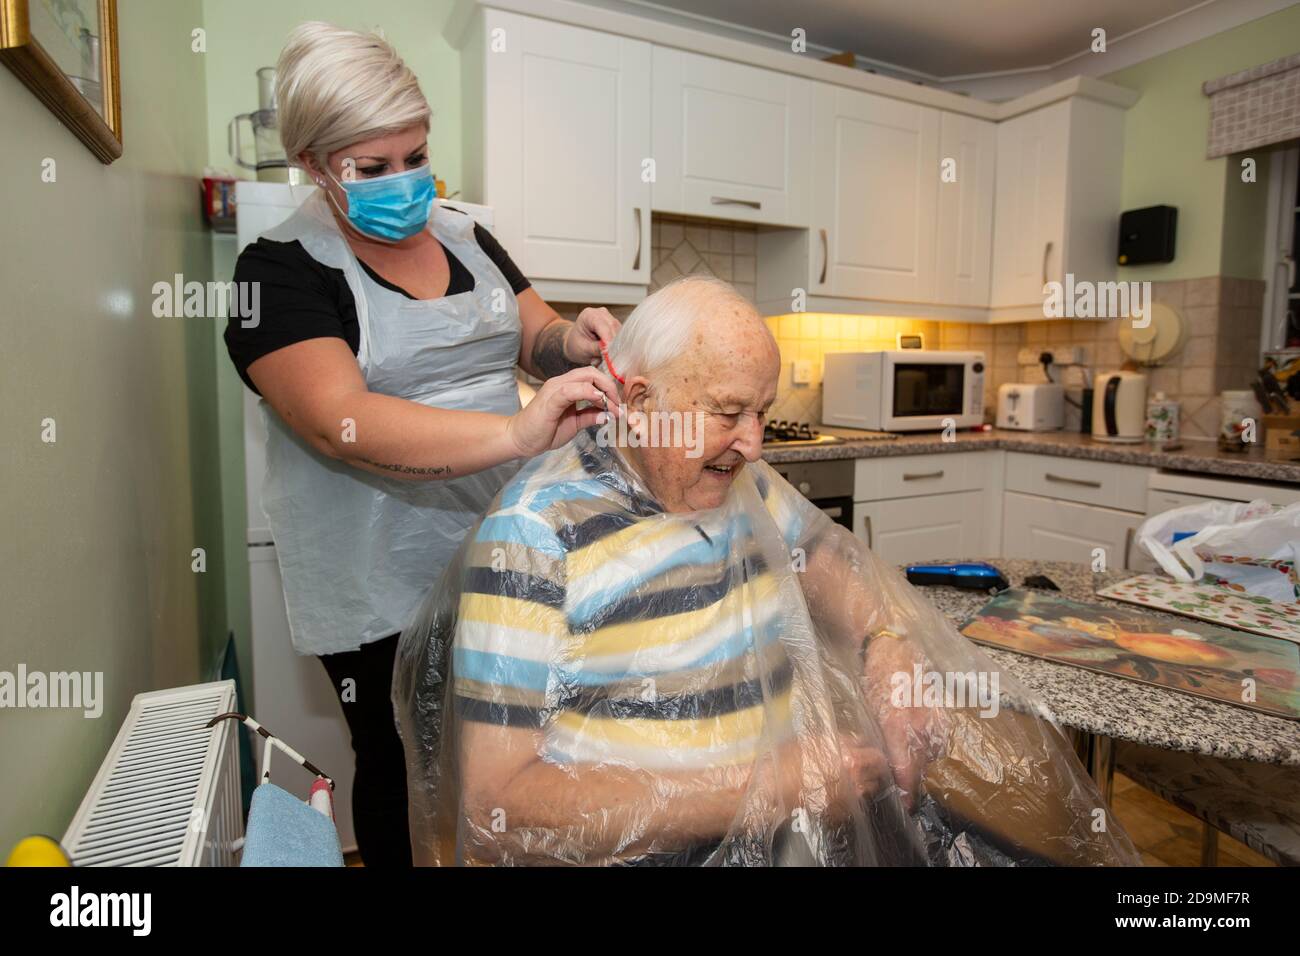 Elderly man in his eighties having his hair cut by a hairdresser wearing PPE as protection against coronavirus whilst at working remotely, England, UK Stock Photo